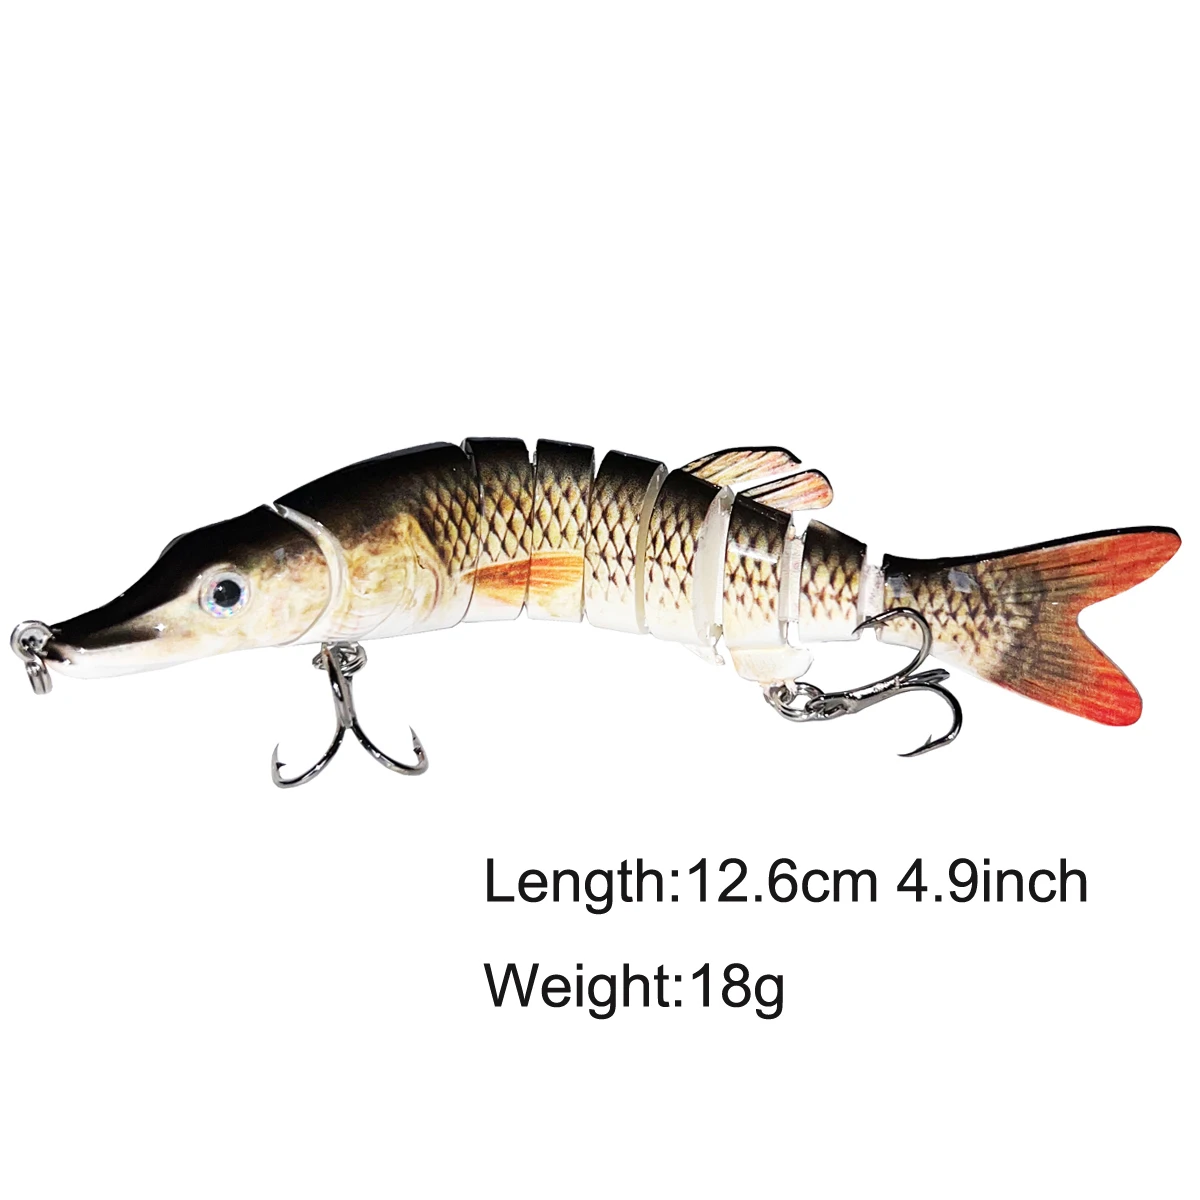 Proaovao Sinking 8 Segements Multi Jointed Swimbait Minnow Fishing Lures  For Mandarin Fish Pike Bass In Sea Lakes River Pond